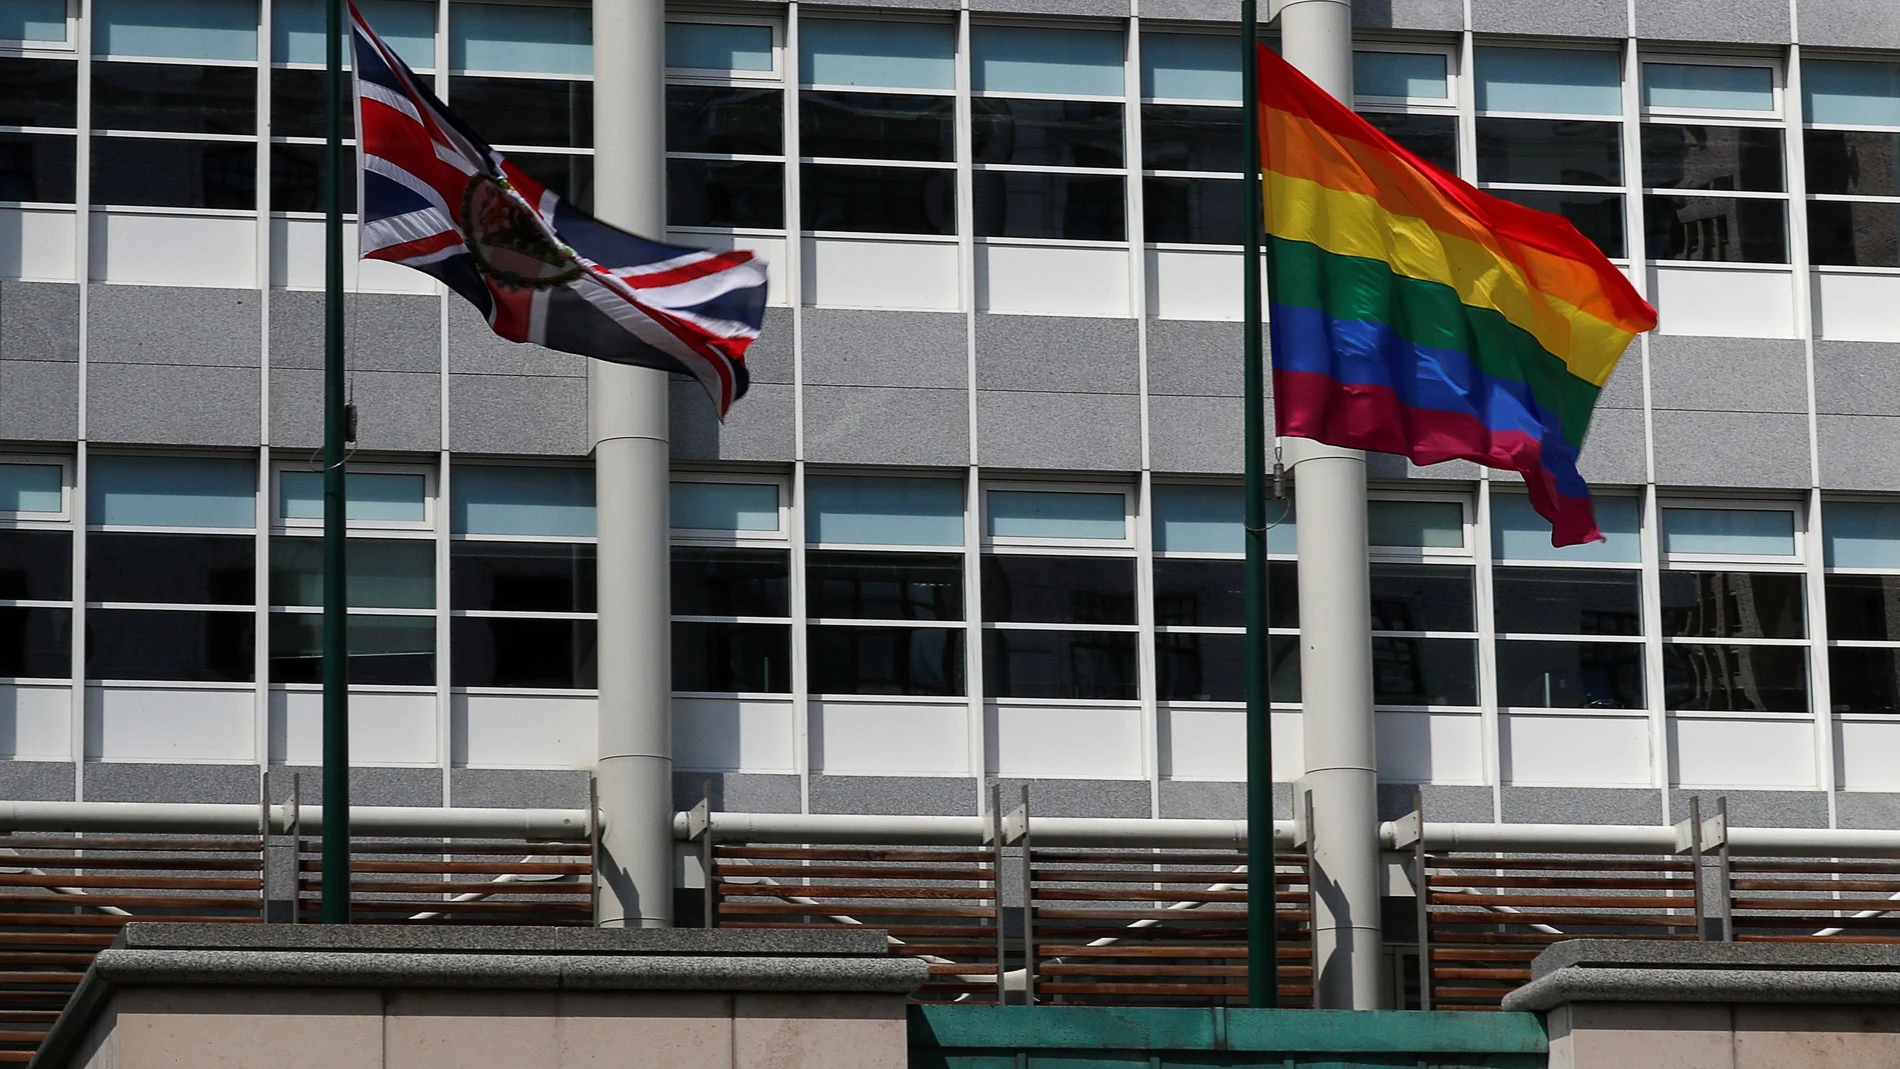 A rainbow flag flies in support of the LGBT community at the British Embassy in Moscow